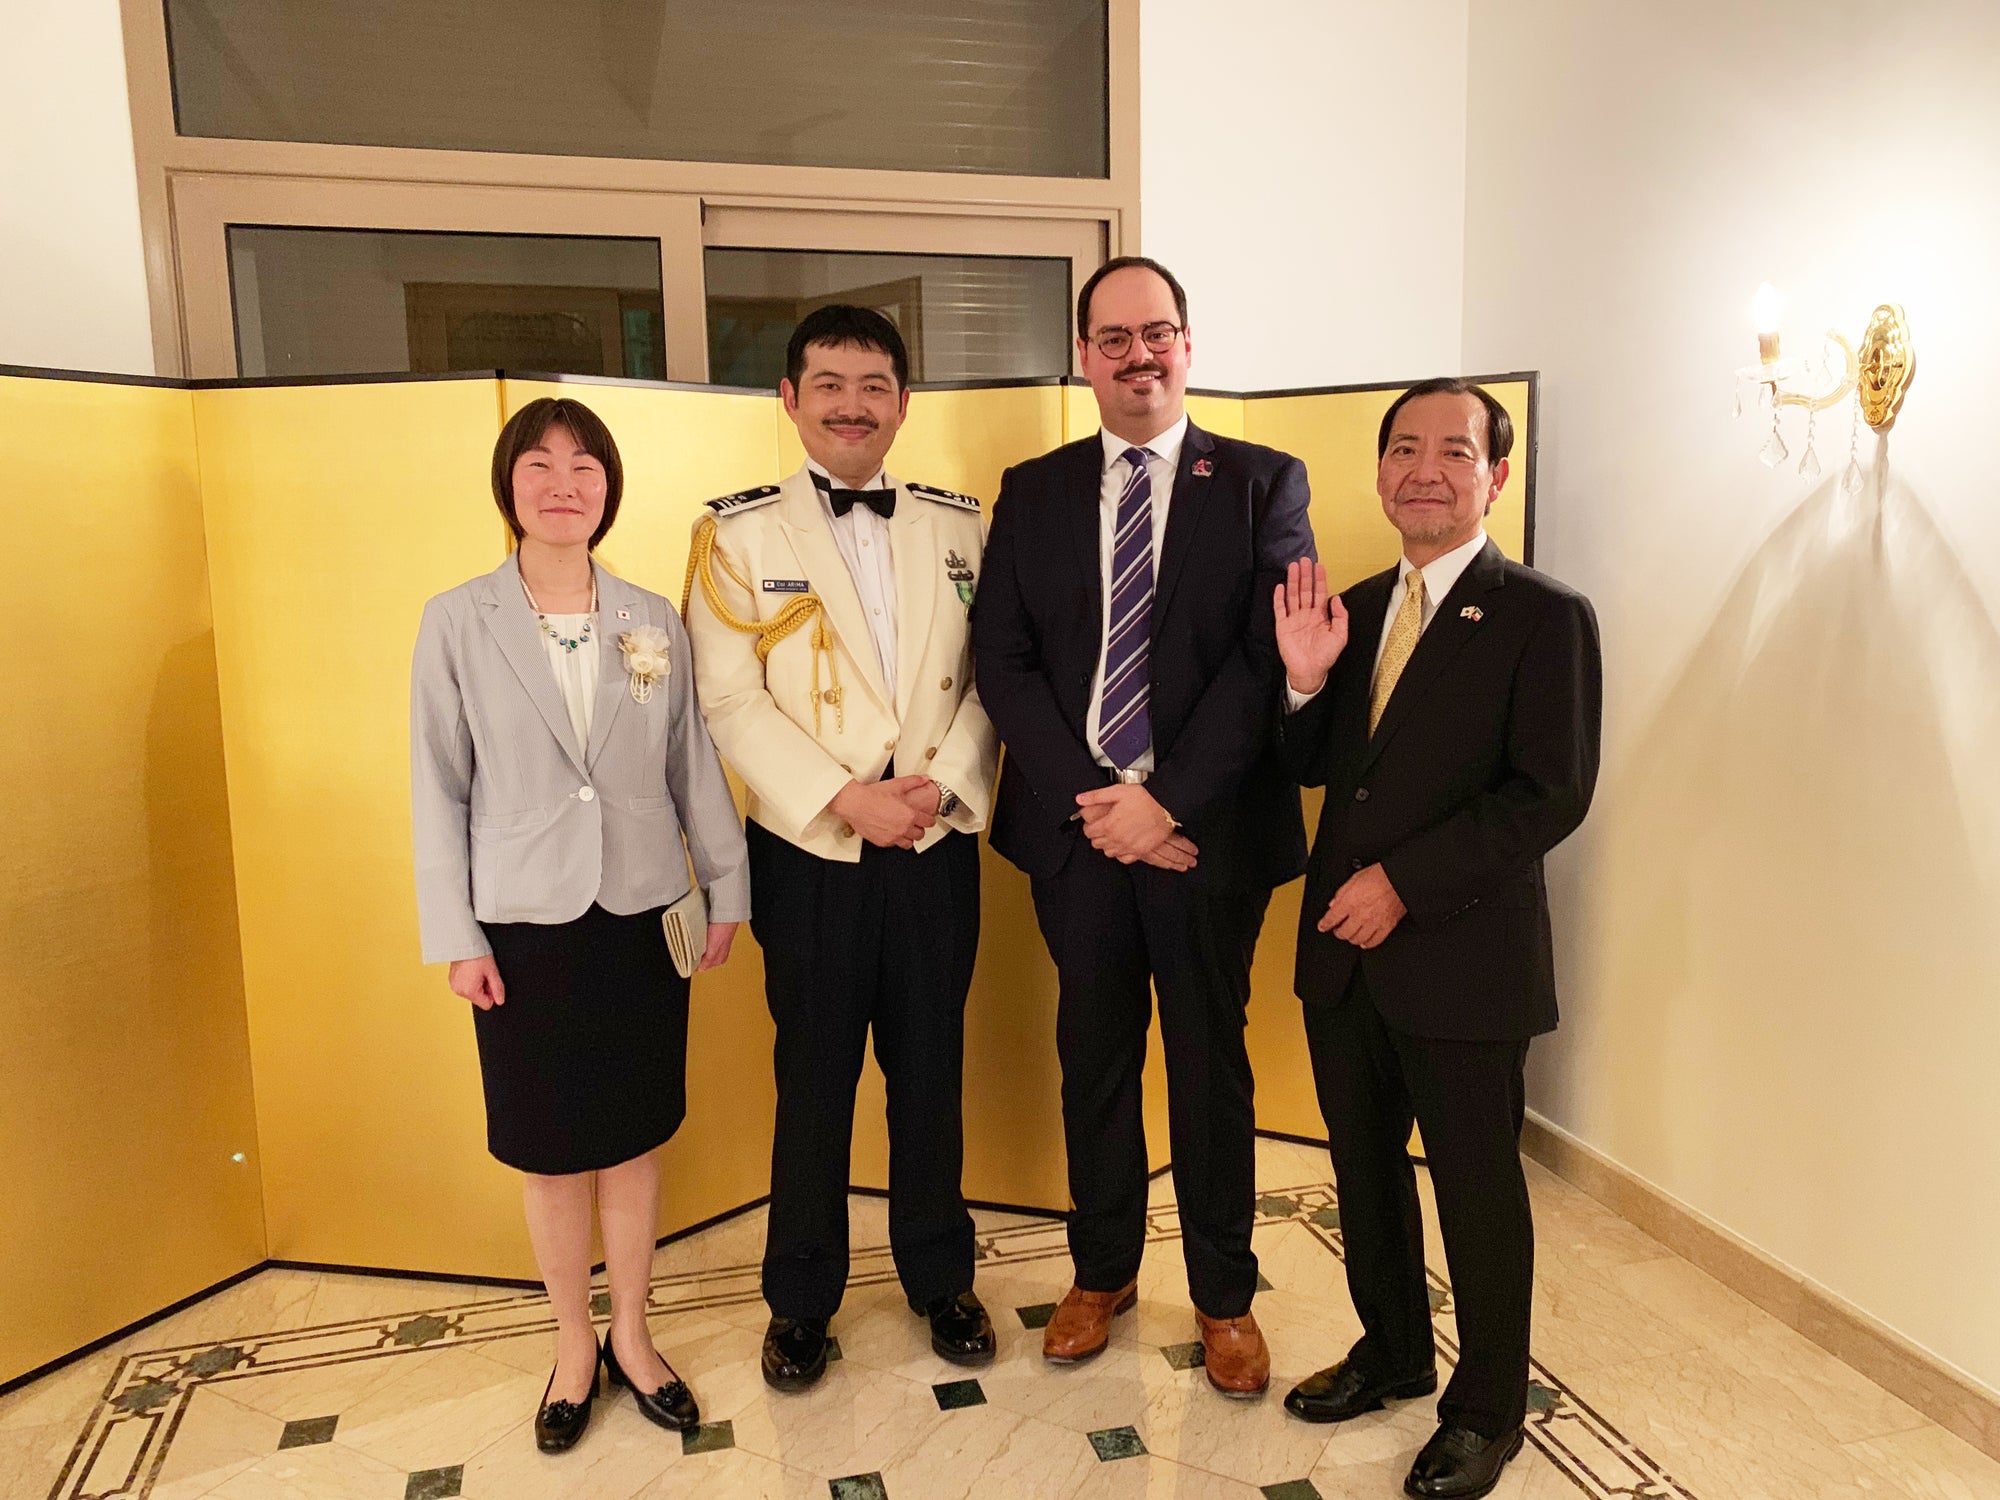 Figurama Collectors CEO, Mr. Shanab, Honored with Invitation to 65th JSDF Day Reception